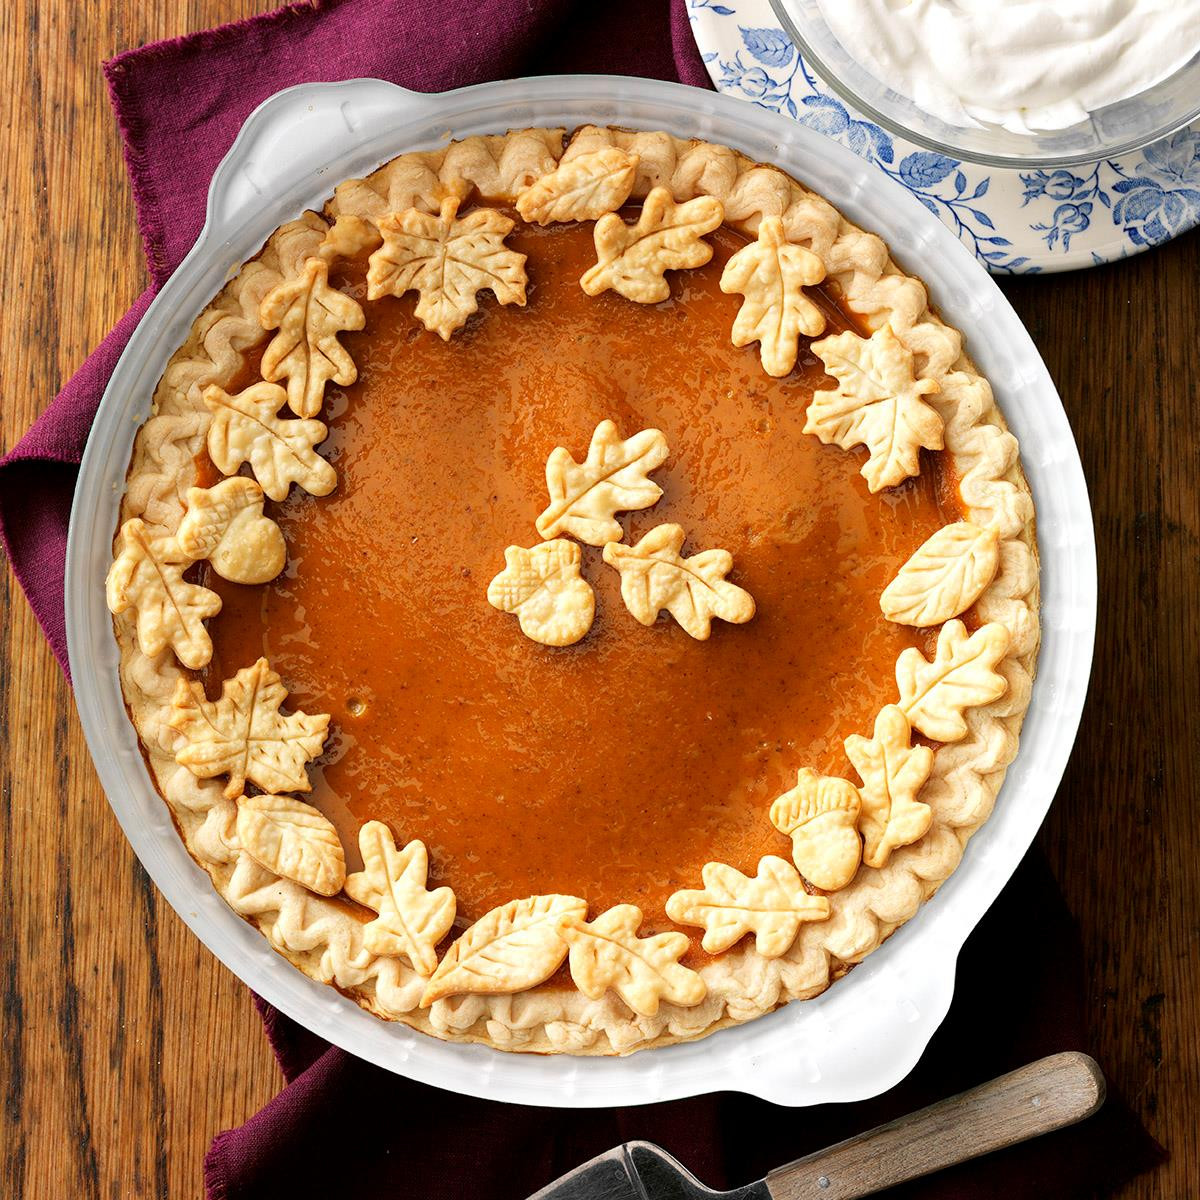 Recipe For Pumpkin Pie
 25 Pumpkin Pie Recipes to Try This Year